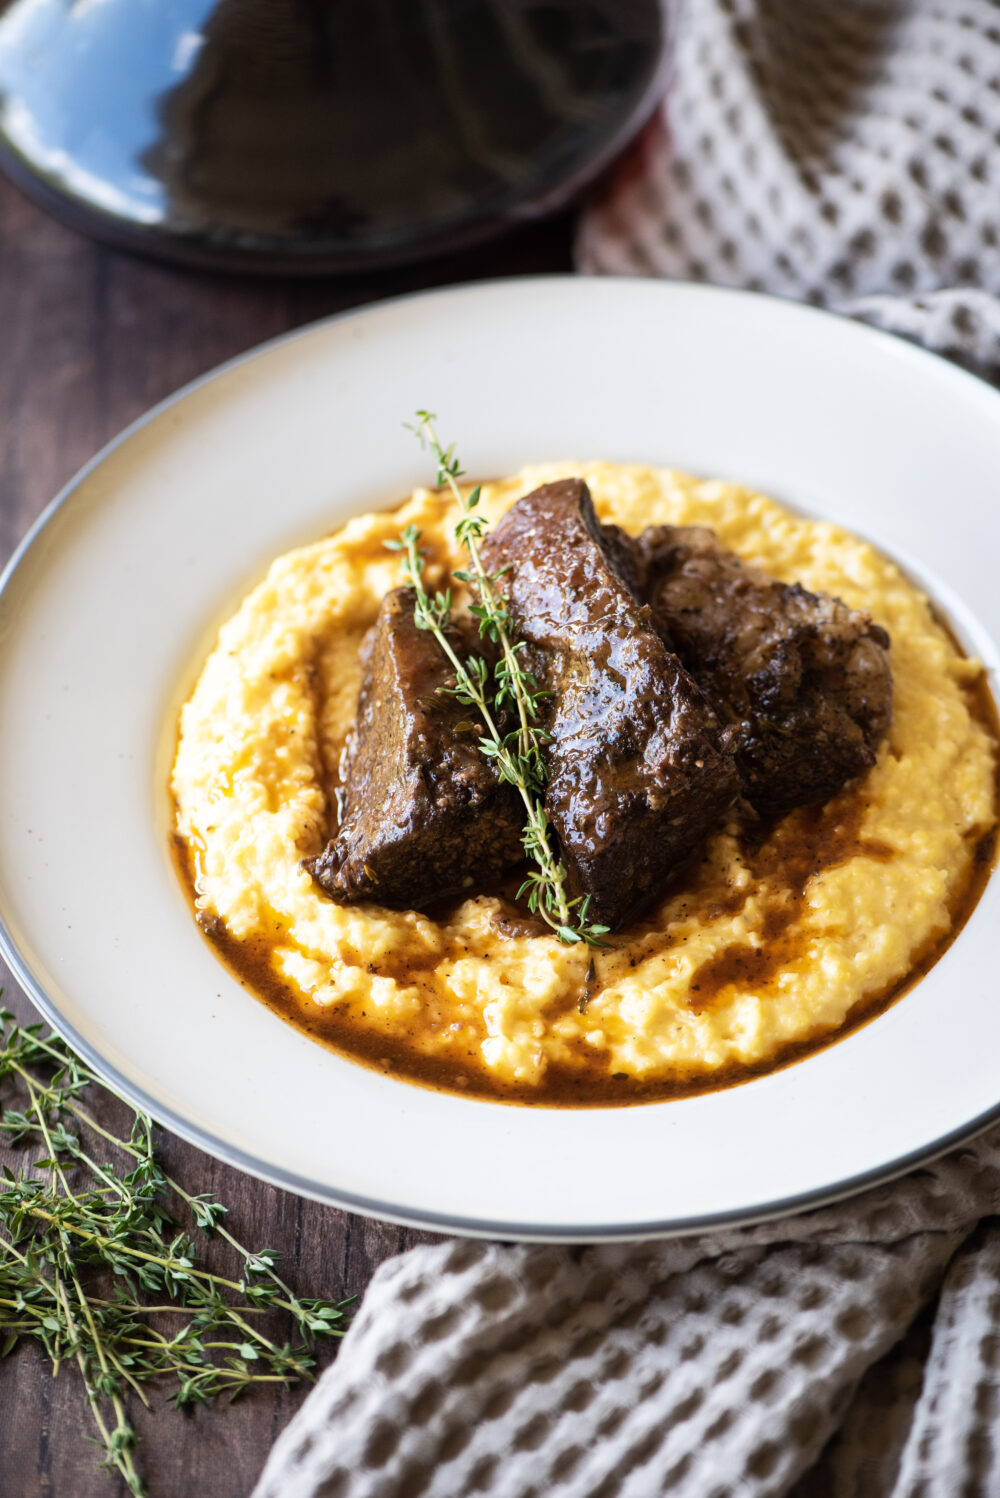 Braised short ribs with cheesy grits